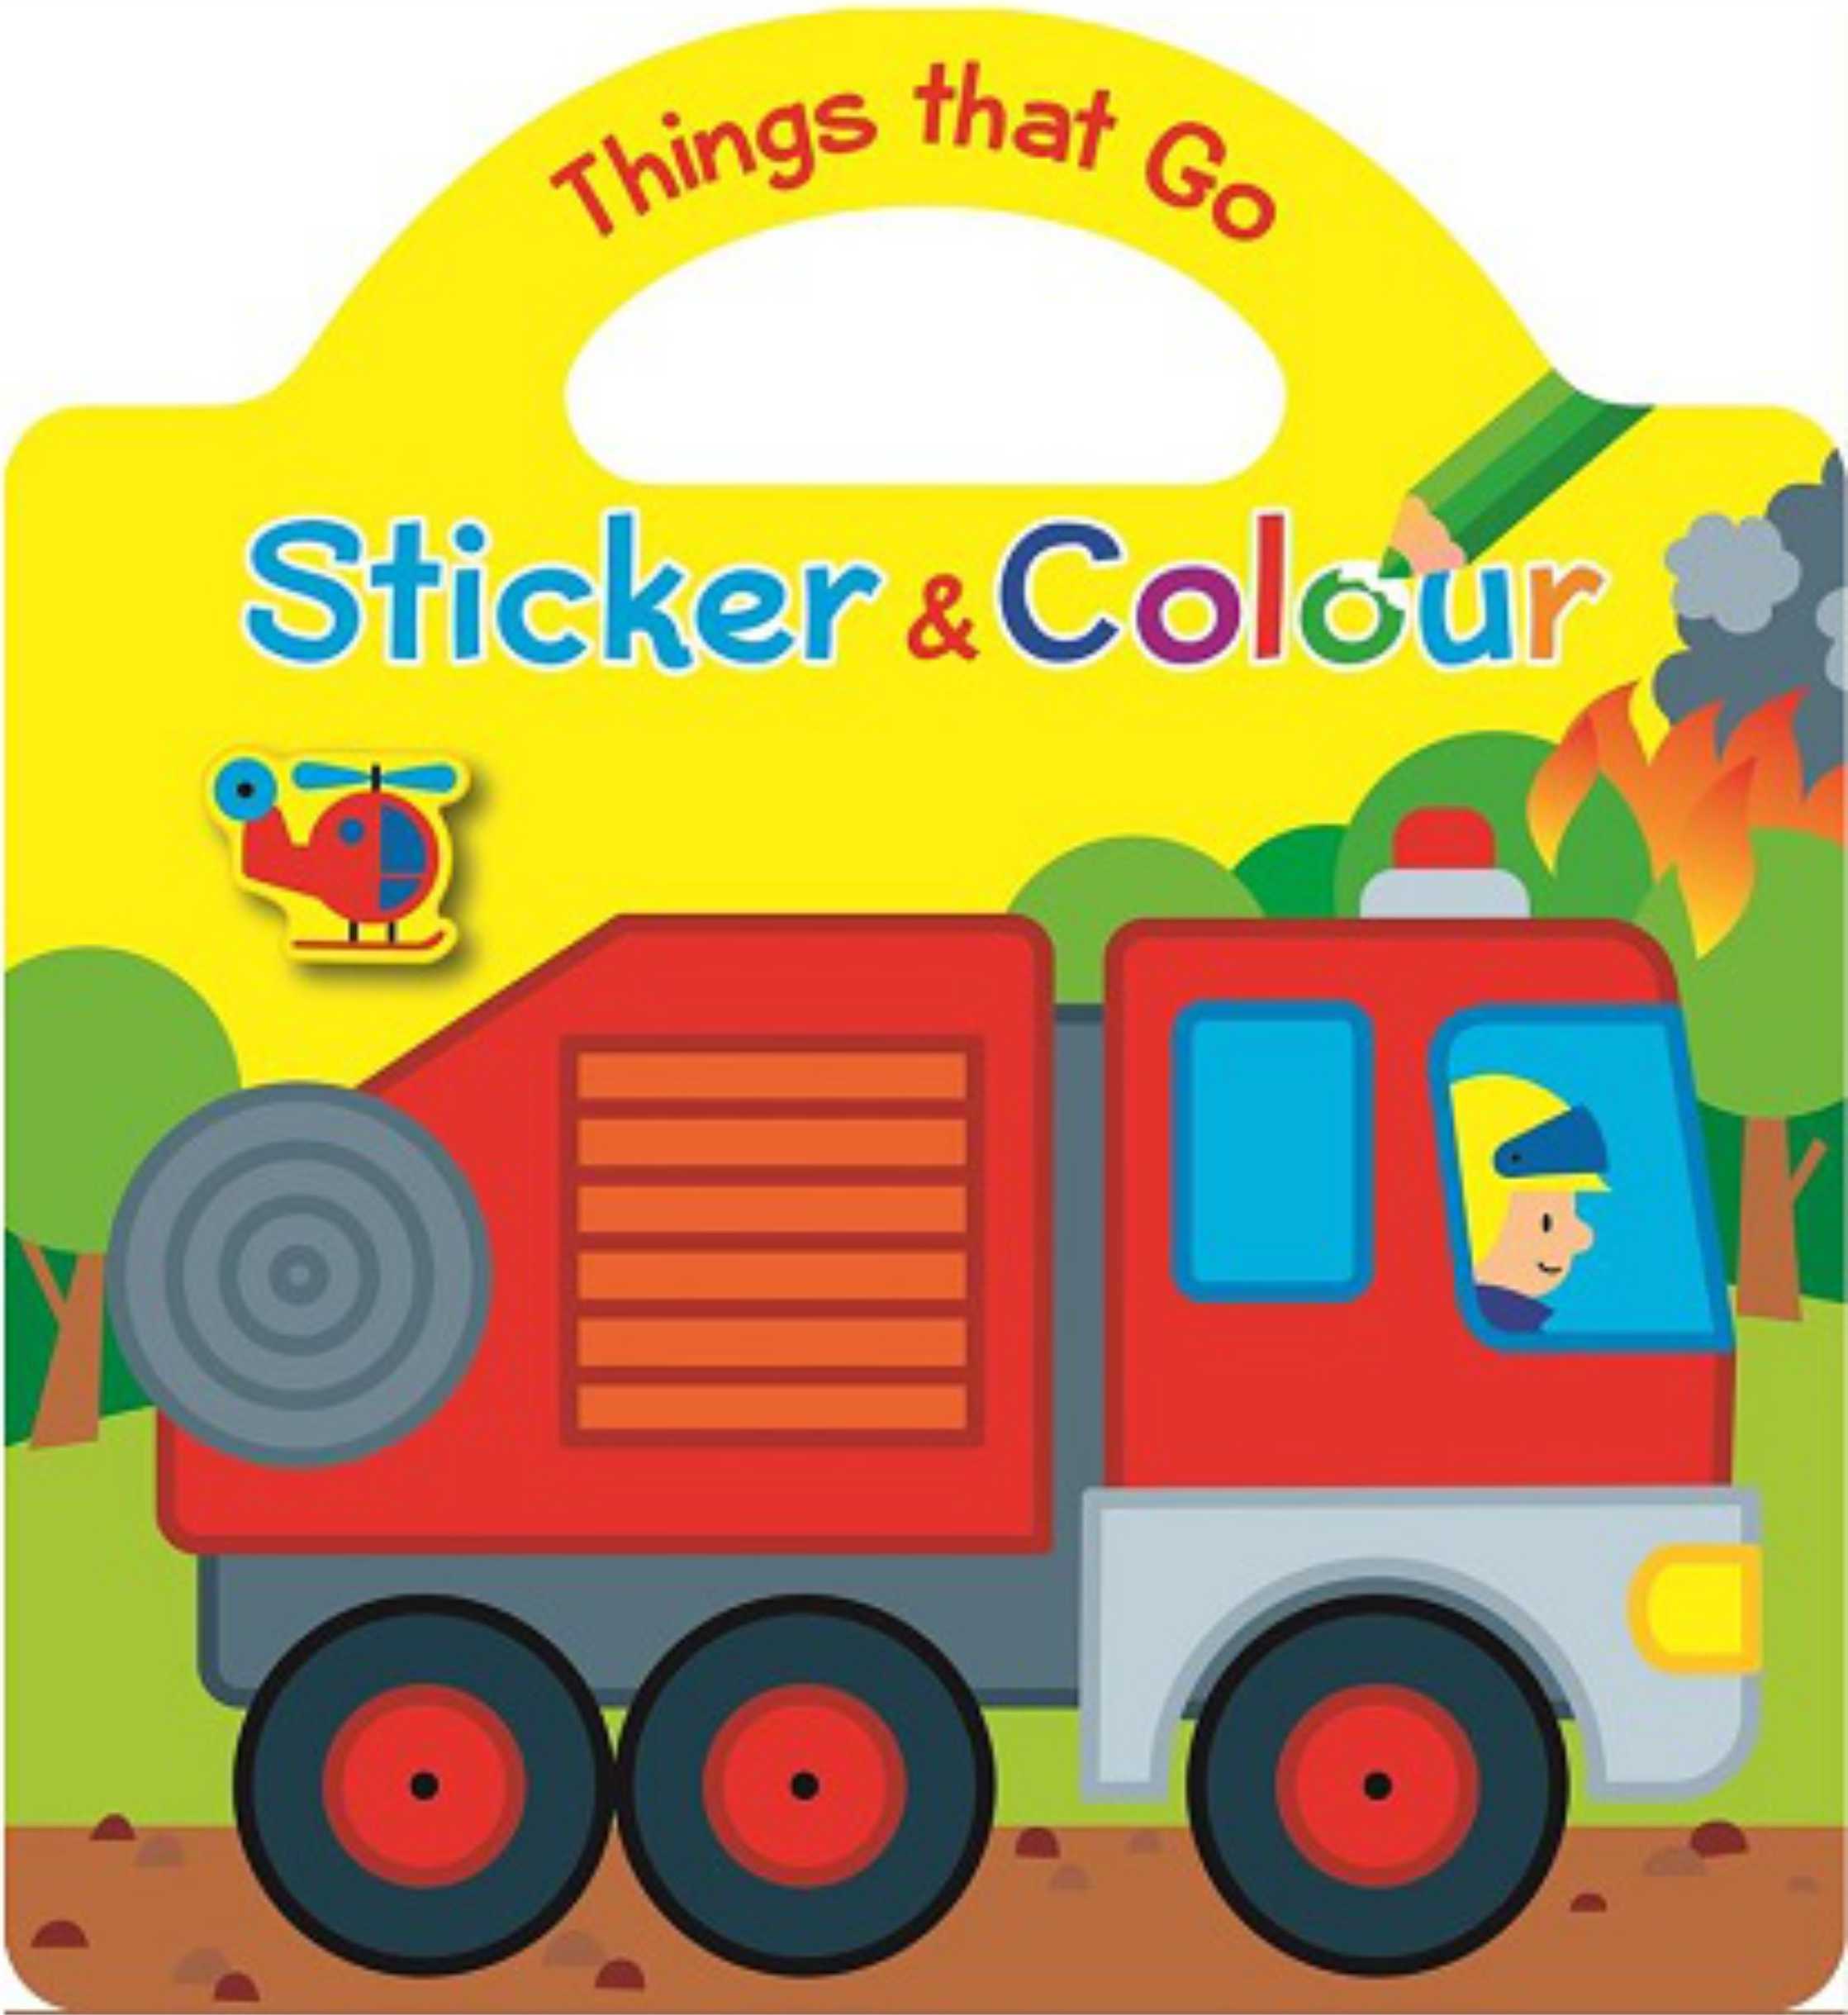 Things That go - Sticker & Colour Book 3